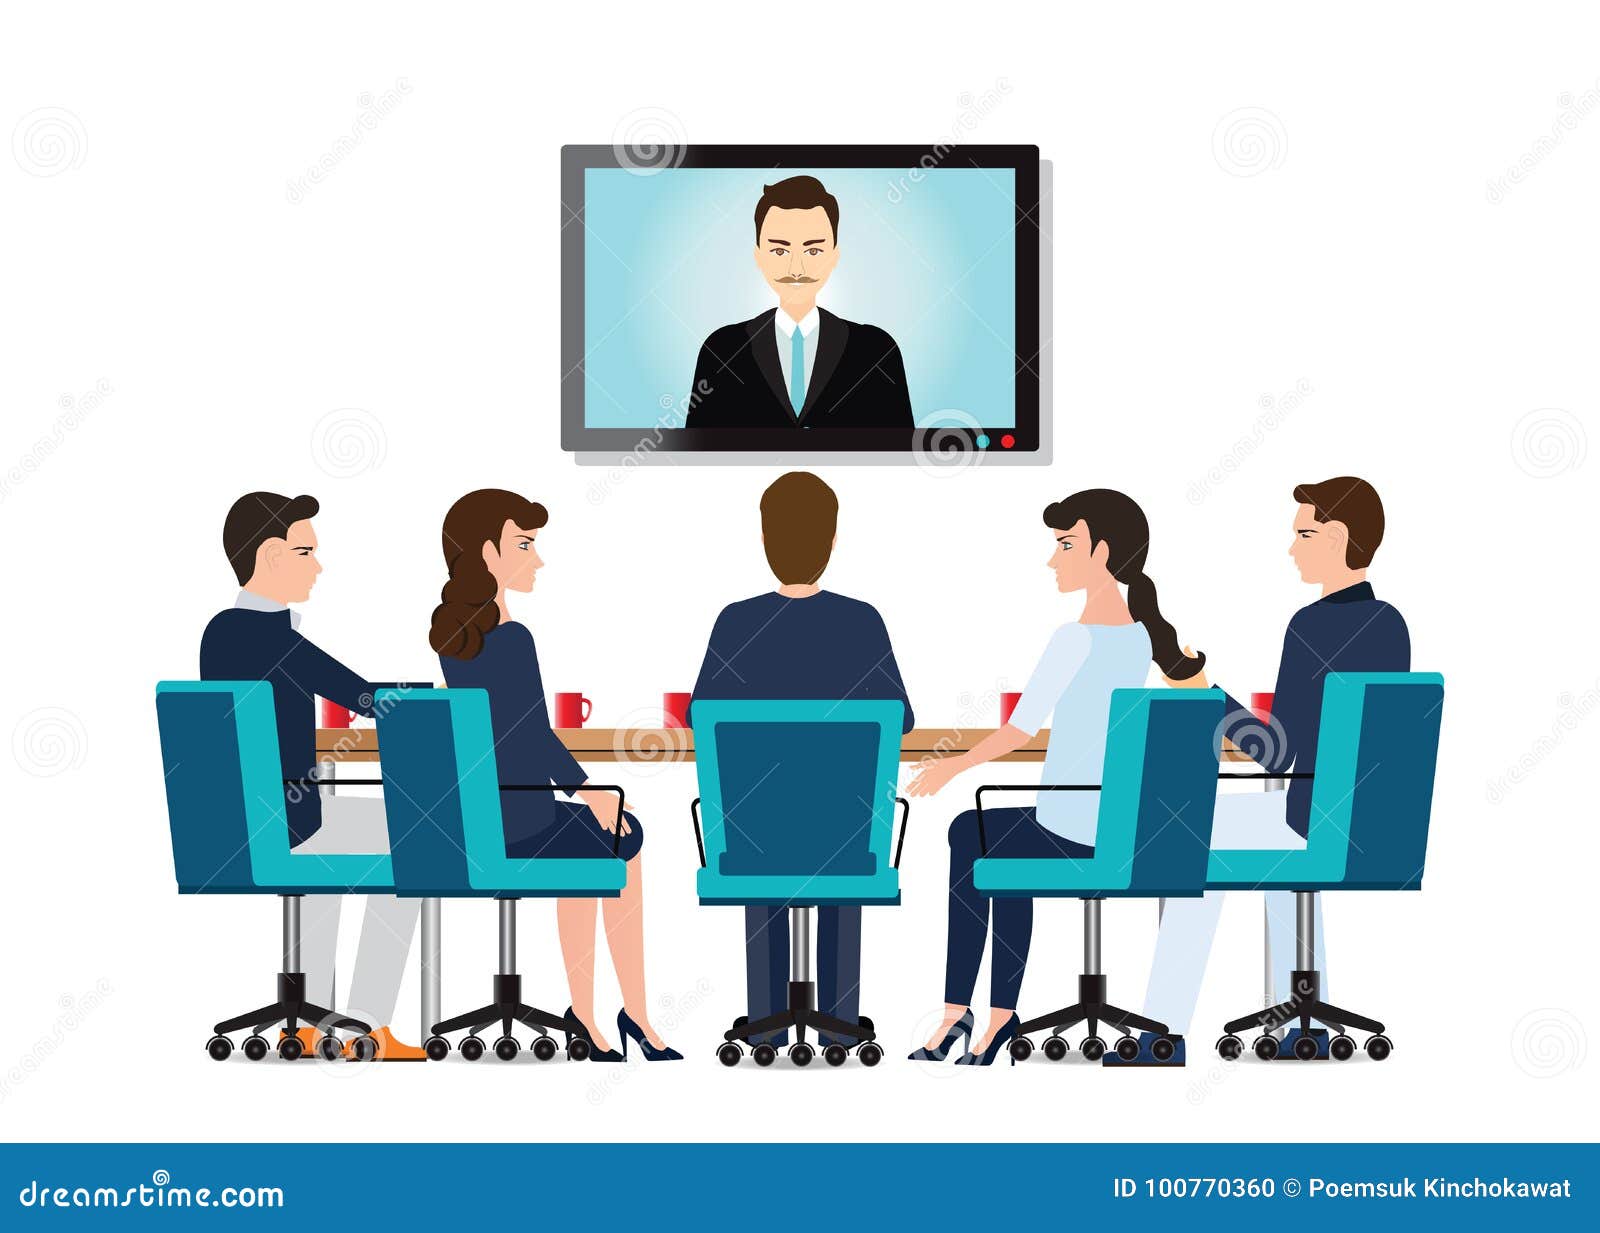 business people attending videoconference meeting.